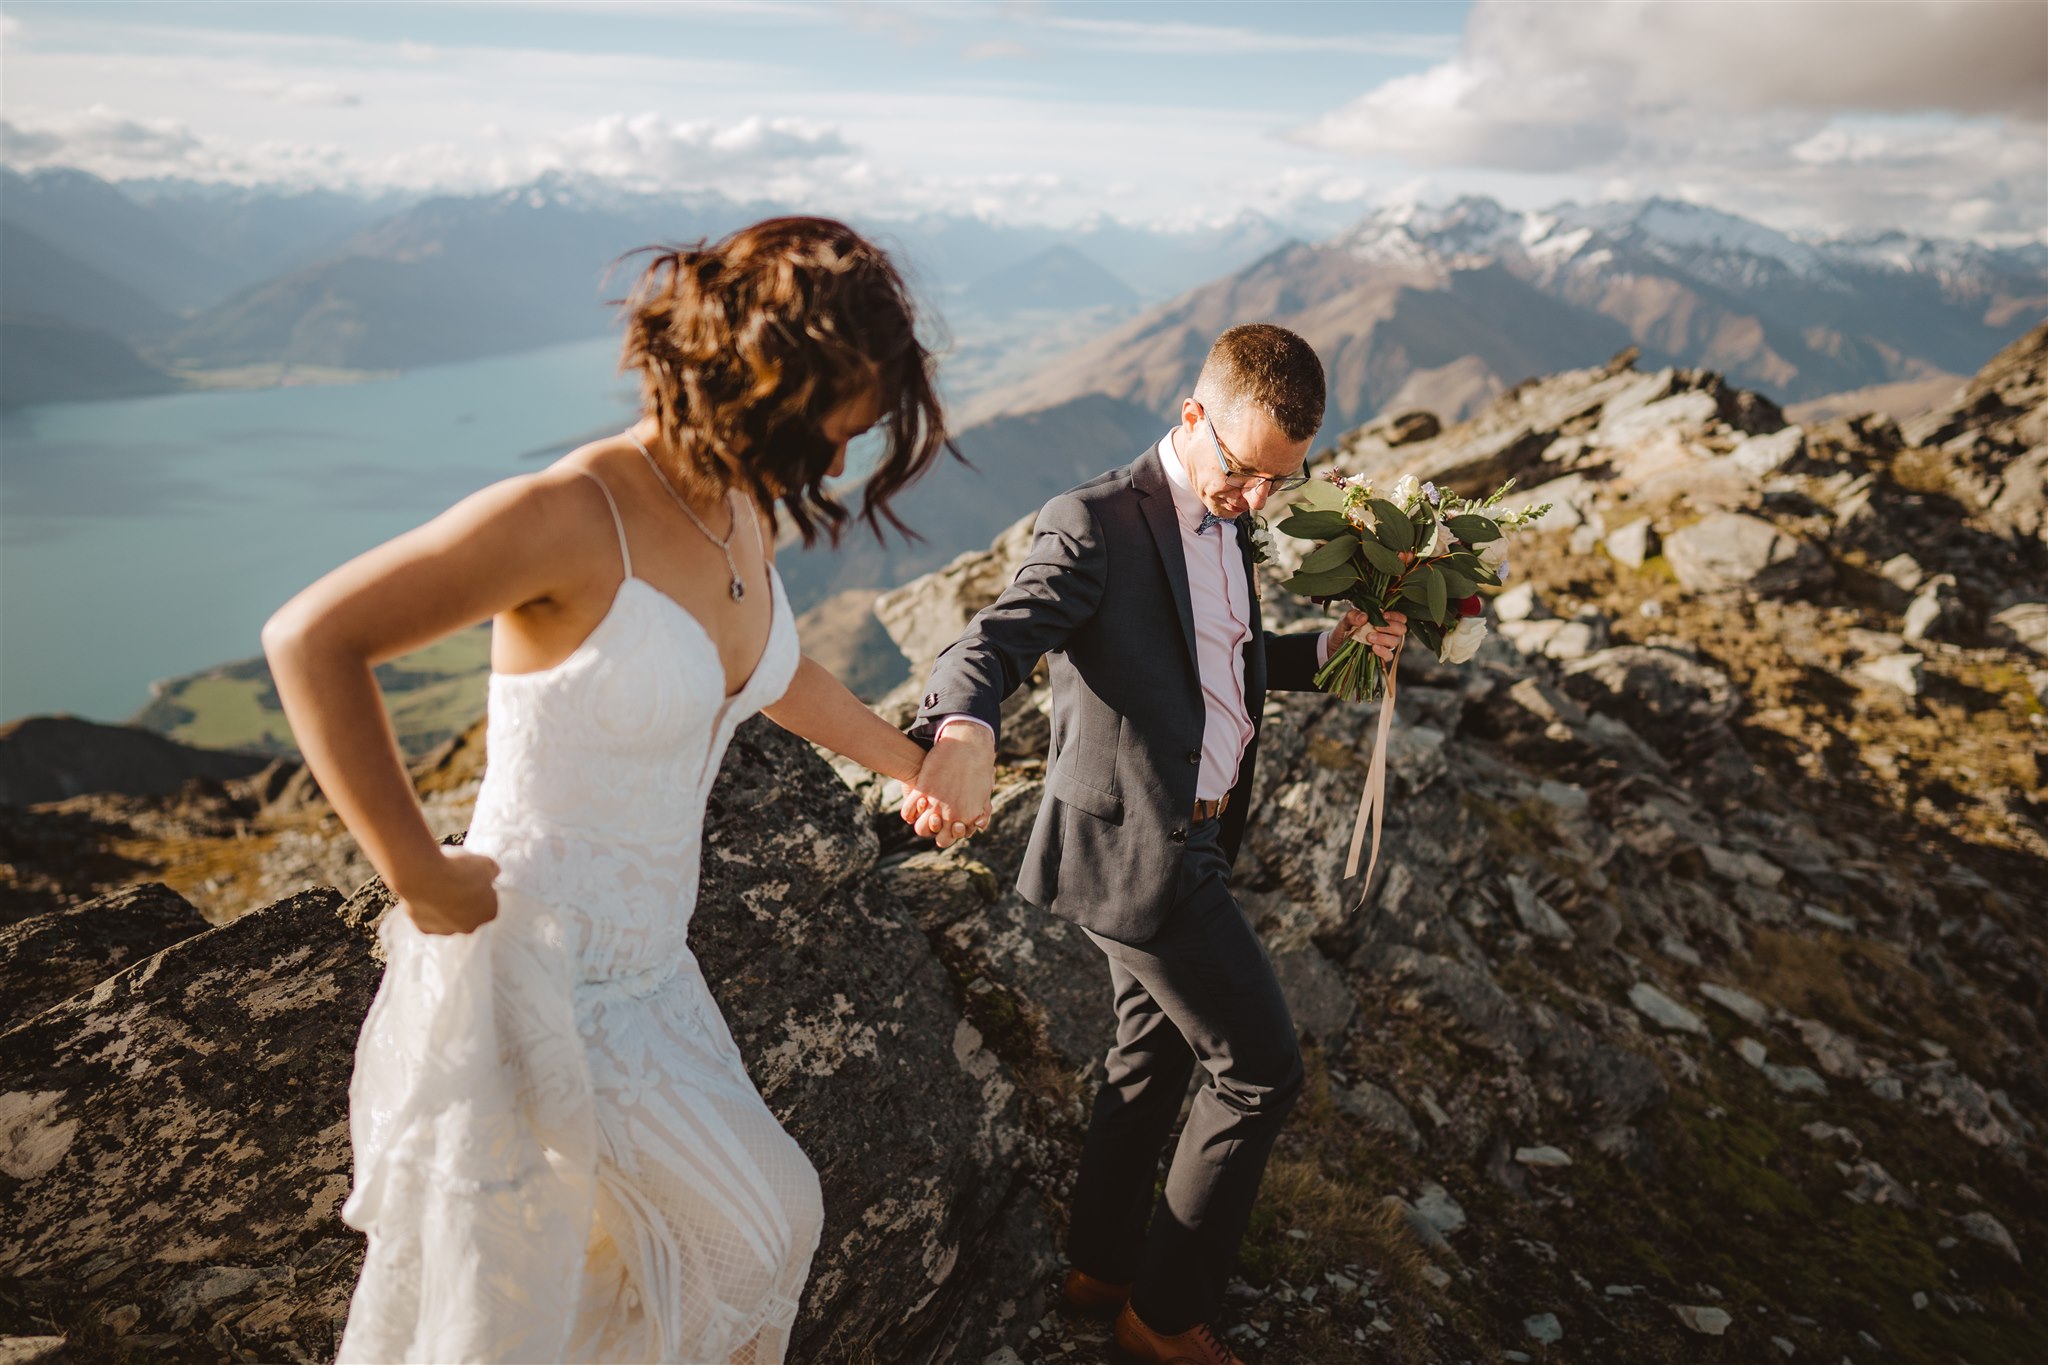 Bride and groom in wedding outfits on mountain top walking over rocky mountains with Glenorchy in the background